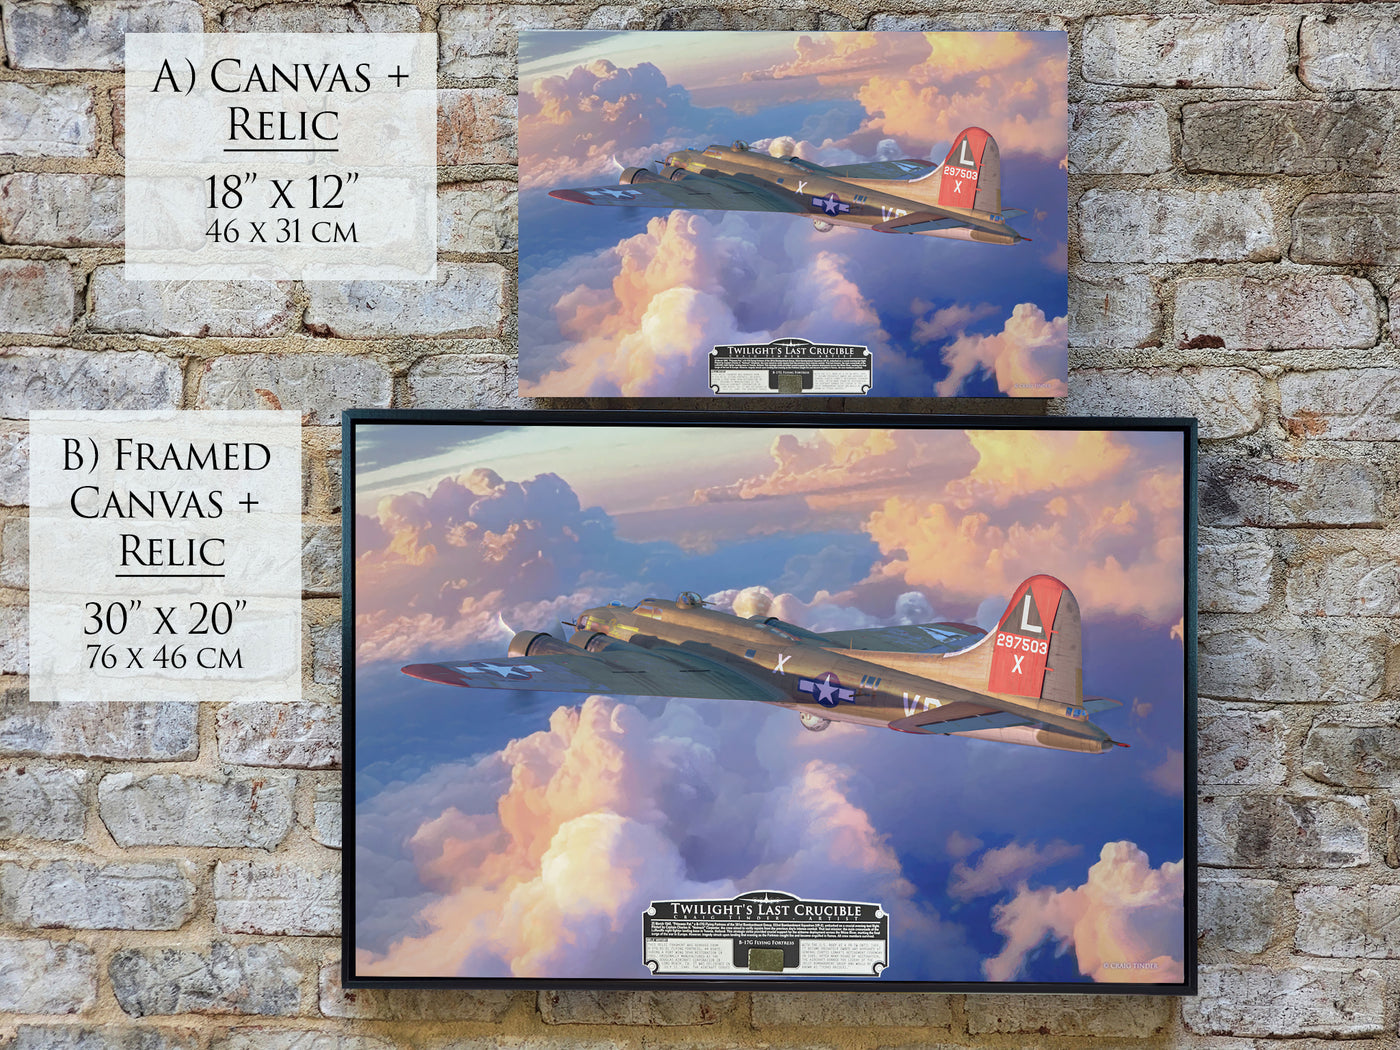 Art print "Twilight's Last Crucible" by Artist Craig Tinder, showing a B-17 flying through the clouds at sunset. Available in 2 canvas sizes.